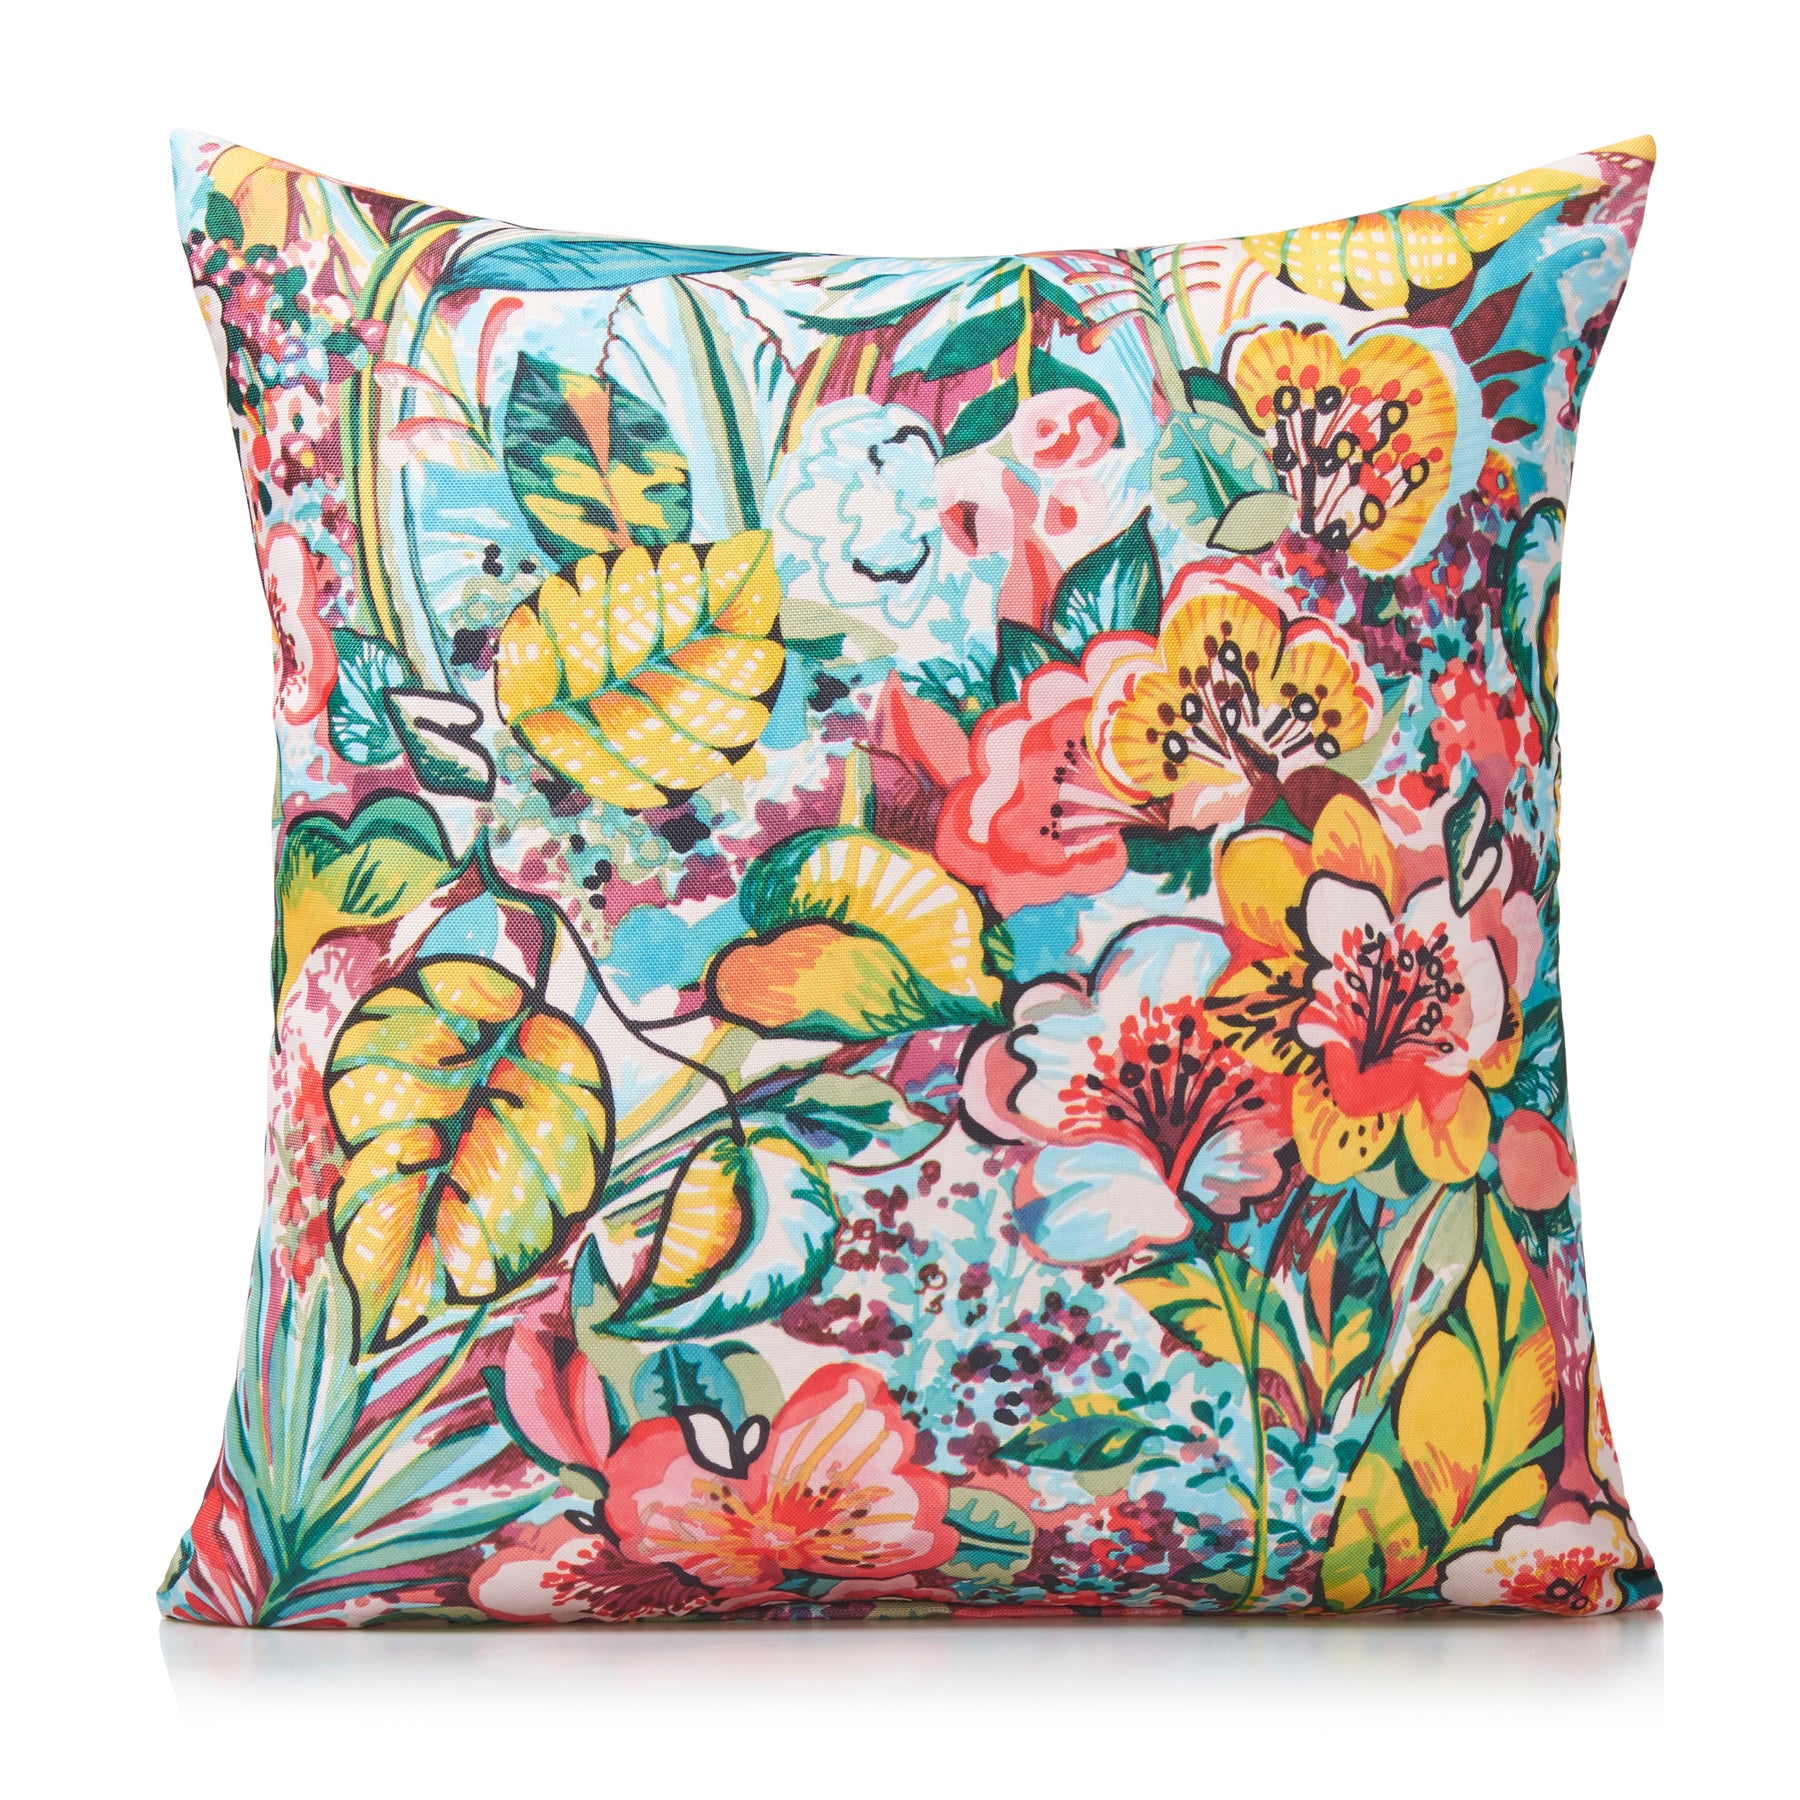 Paradiso Water Resistant Outdoor Filled Cushion 56cm x 56cm Multi